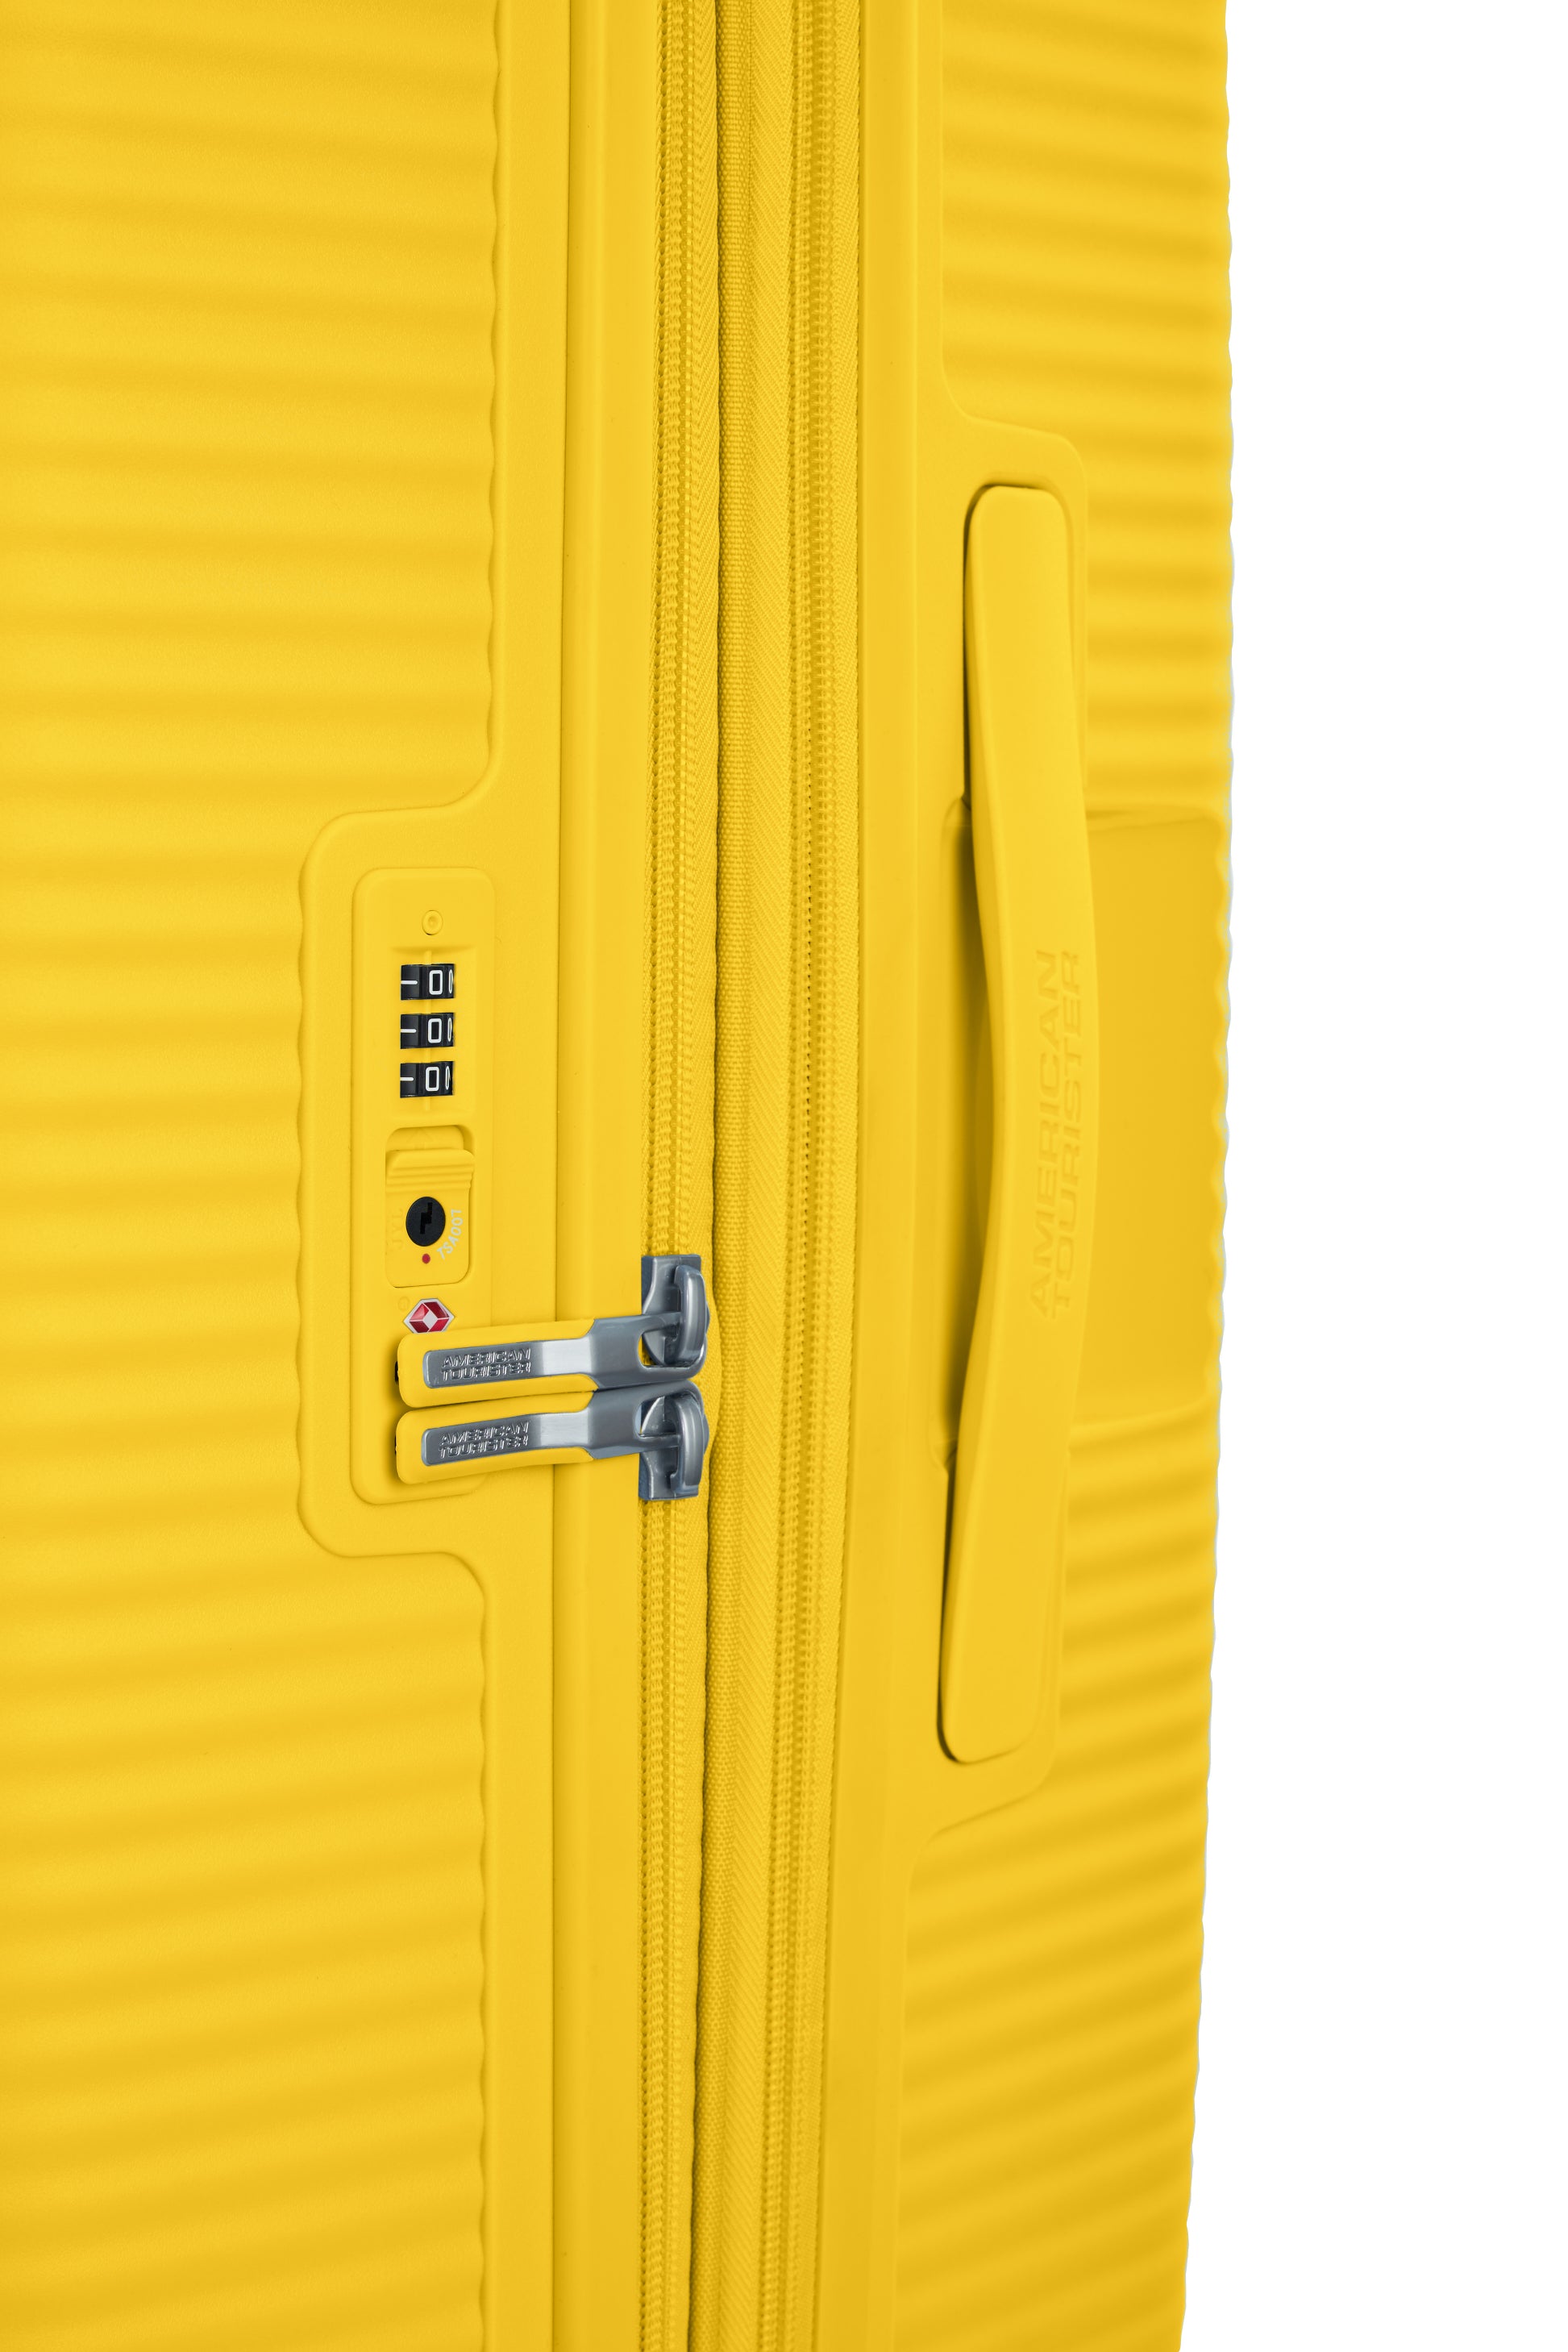 American Tourister - Curio 2.0 80cm Large Suitcase - Golden Yellow-5